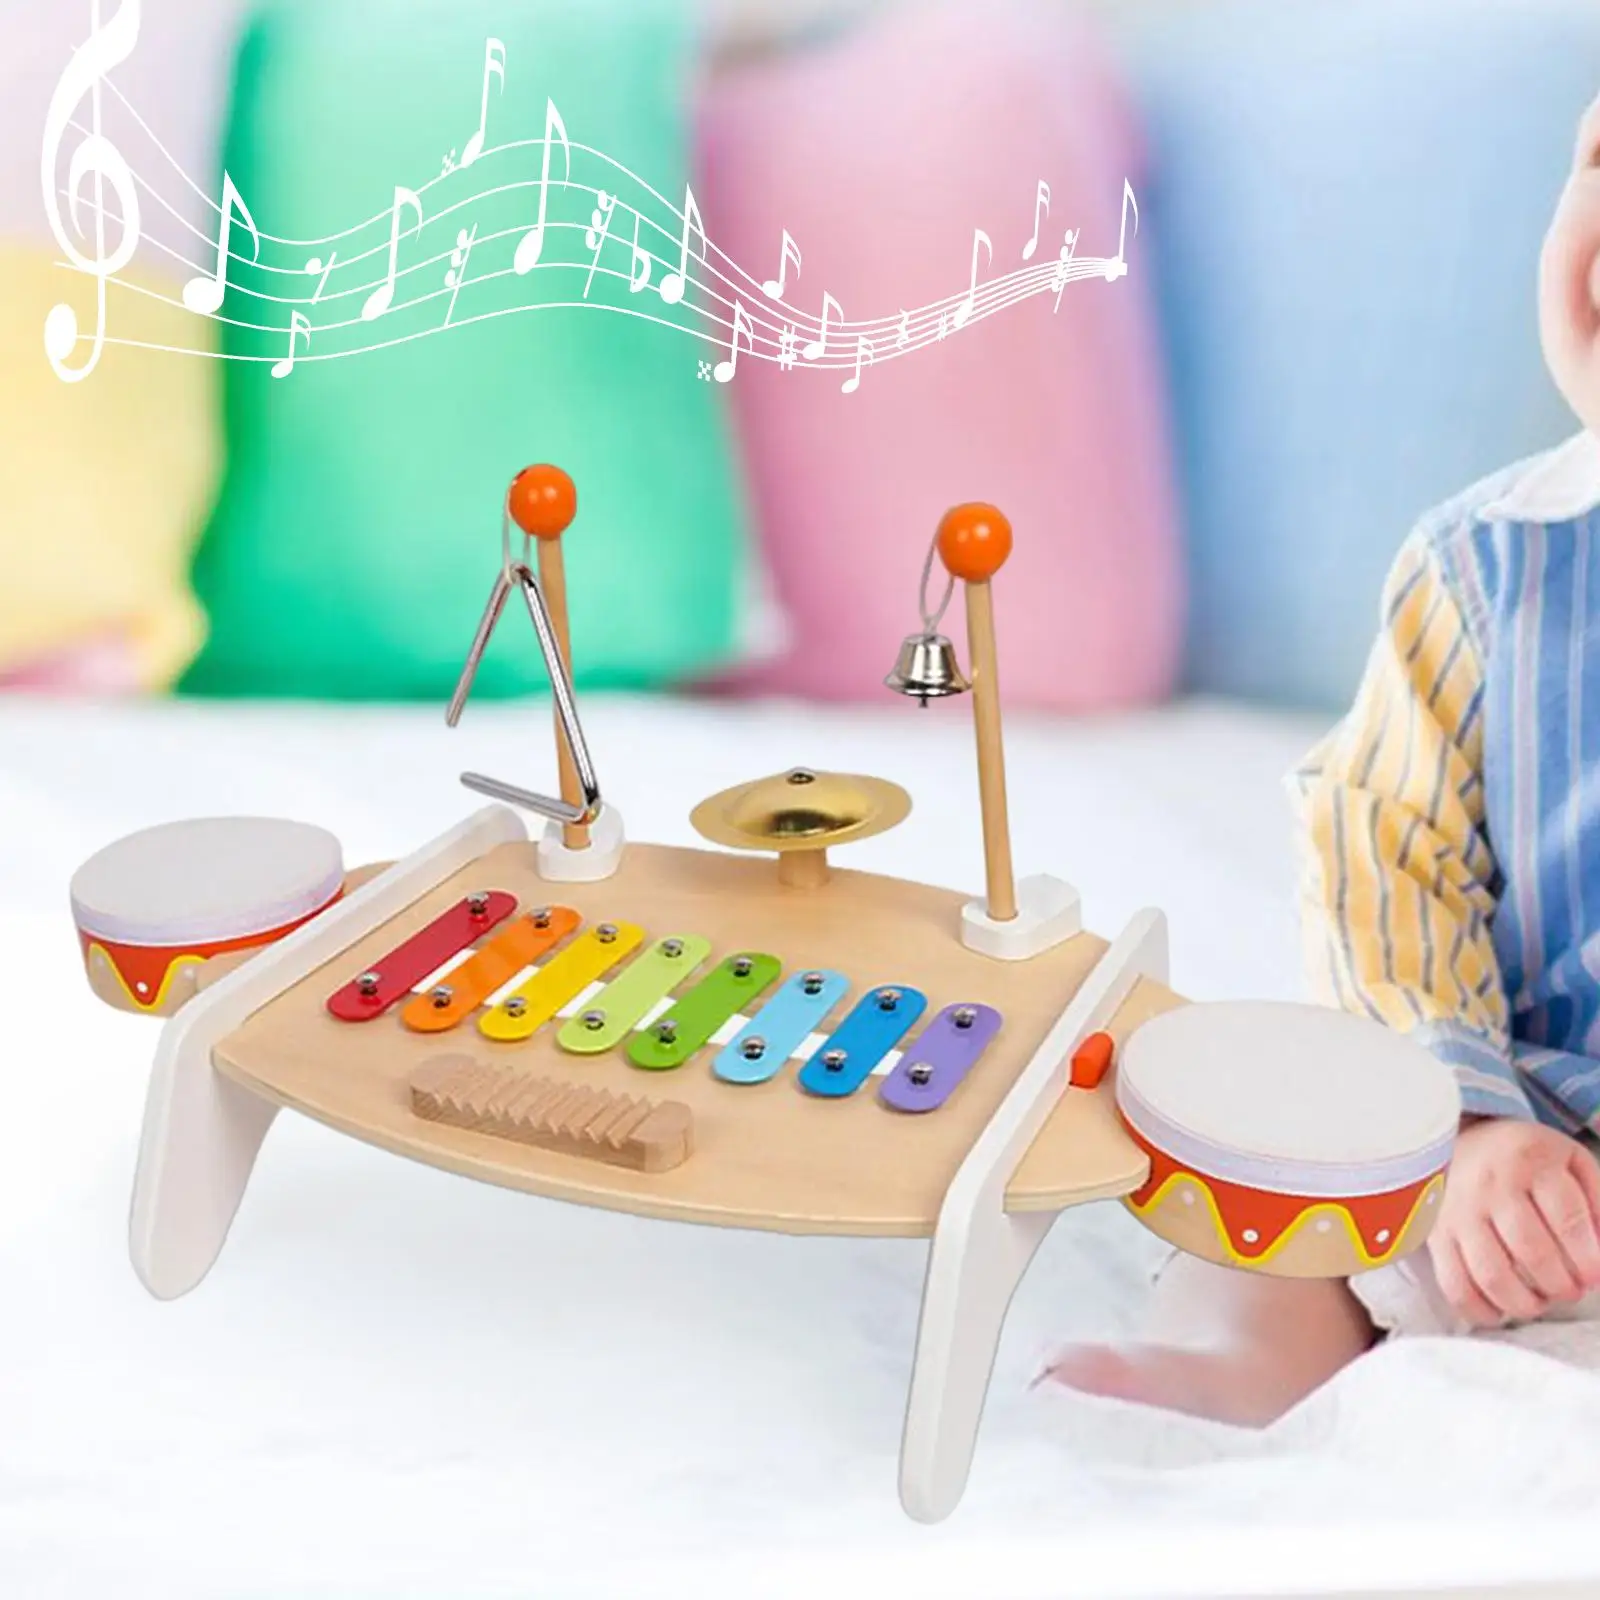 Portable Xylophone Musical Toy Wooden Percussion Toy Musical Instruments Musical Pounding Toy for Boys Beginner Girls Kids Gift